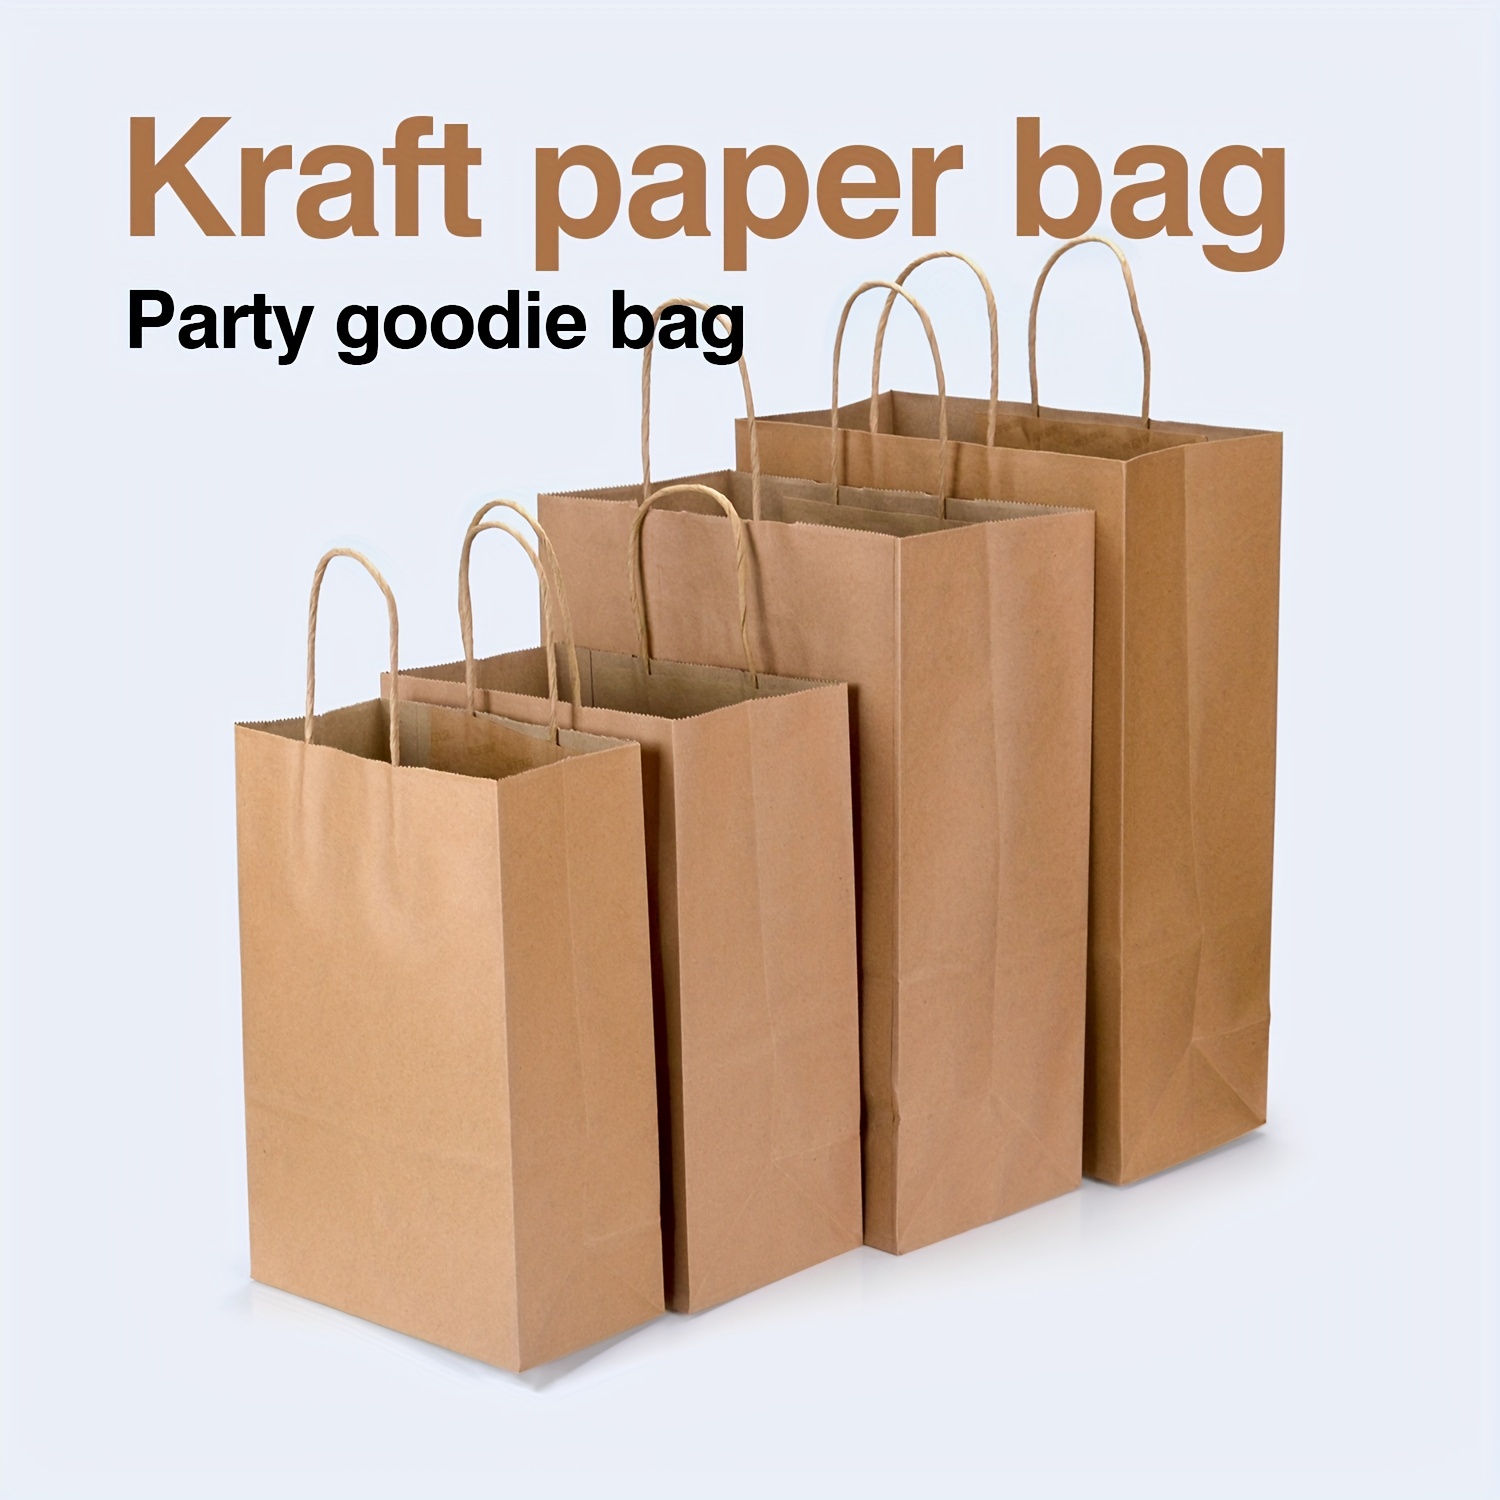 Waxed Paper Party Favor Bags 20 Food Safe Treat Bags Glassine Bags, Wax  Paper Bags, Gift Bag, Goodie Bag Wedding, Shower, Party Favor 